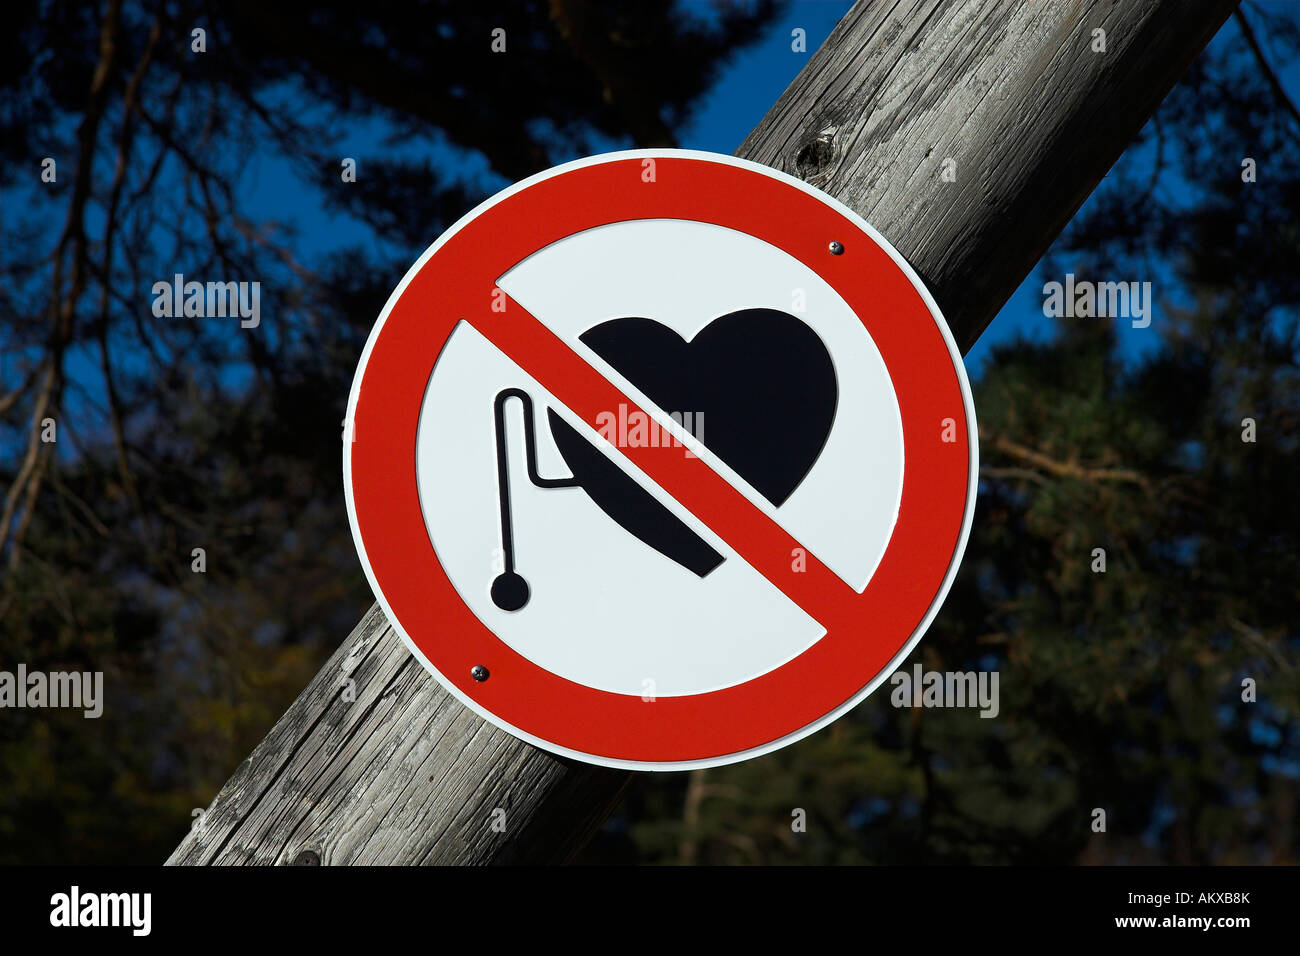 Warning sign for poeple with cardiac pacemakers near a radio tower Stock Photo